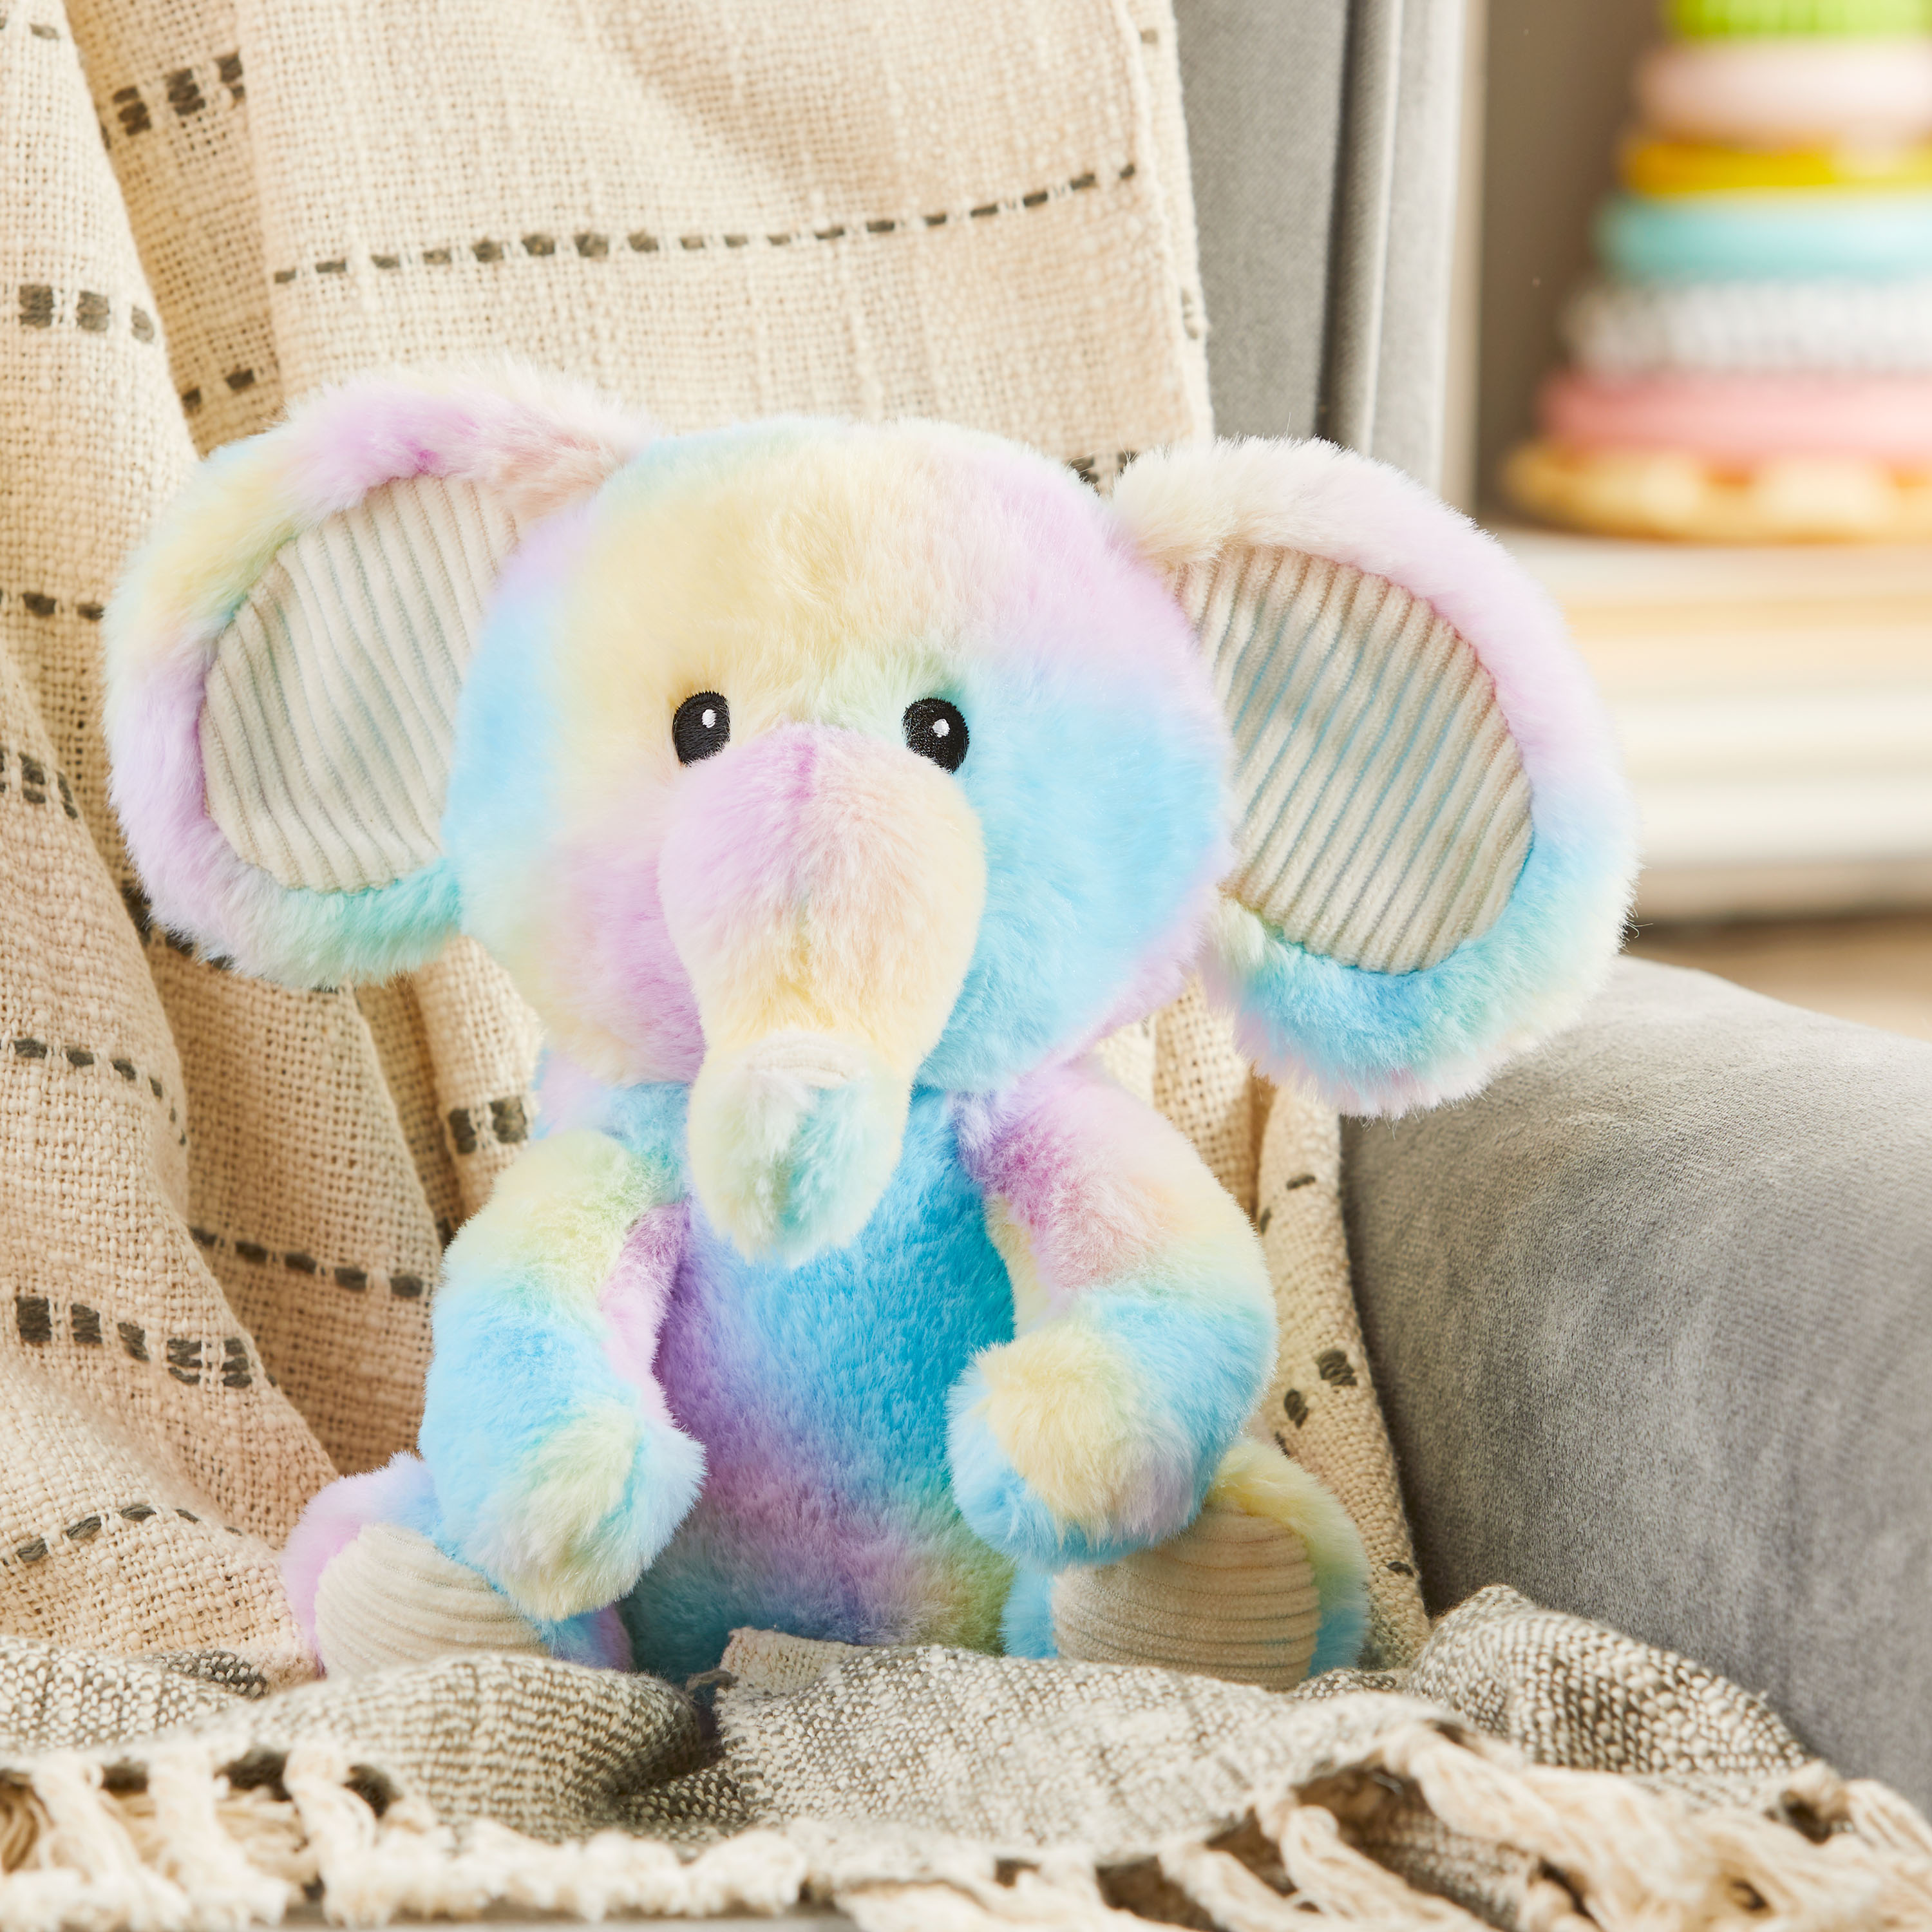 Spark Create Imagine Tie Dye Elephant Plush Toy, for All Ages - image 2 of 7